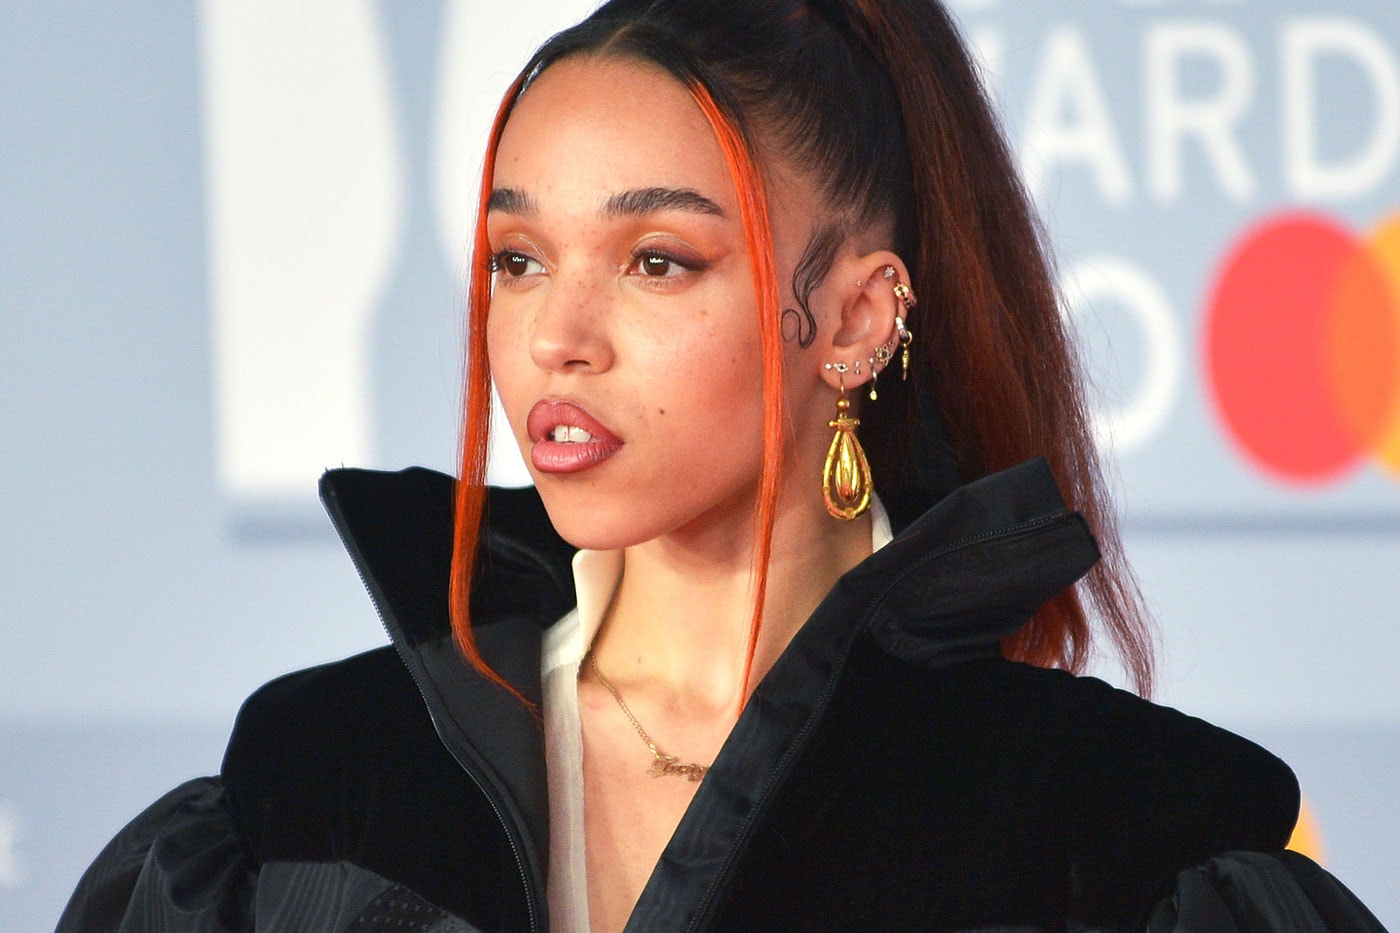 FKA twigs Covers the 2015 October "Nowstalgia" Issue of PAPER Magazine